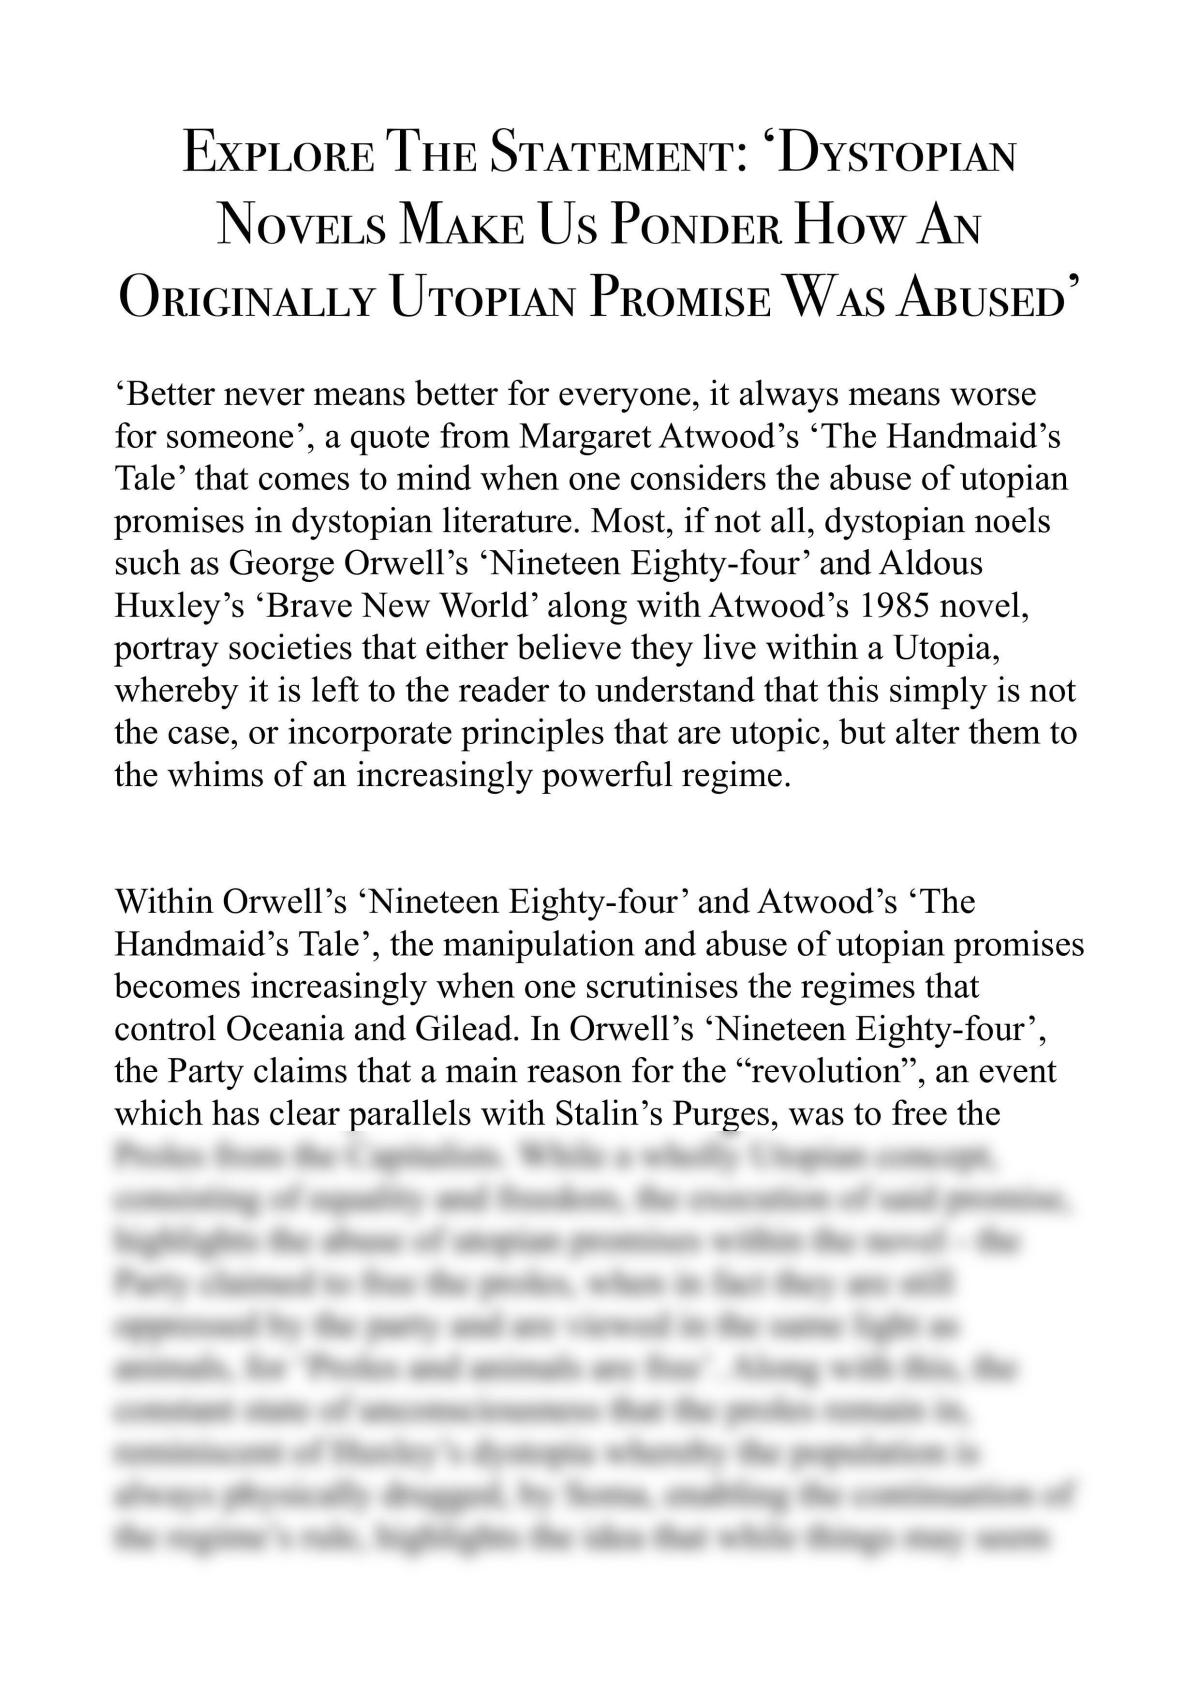 Explore the Statement: ‘Dystopian Novels Make Us Ponder How an Originally Utopian Promise Was Abused’ - Page 1